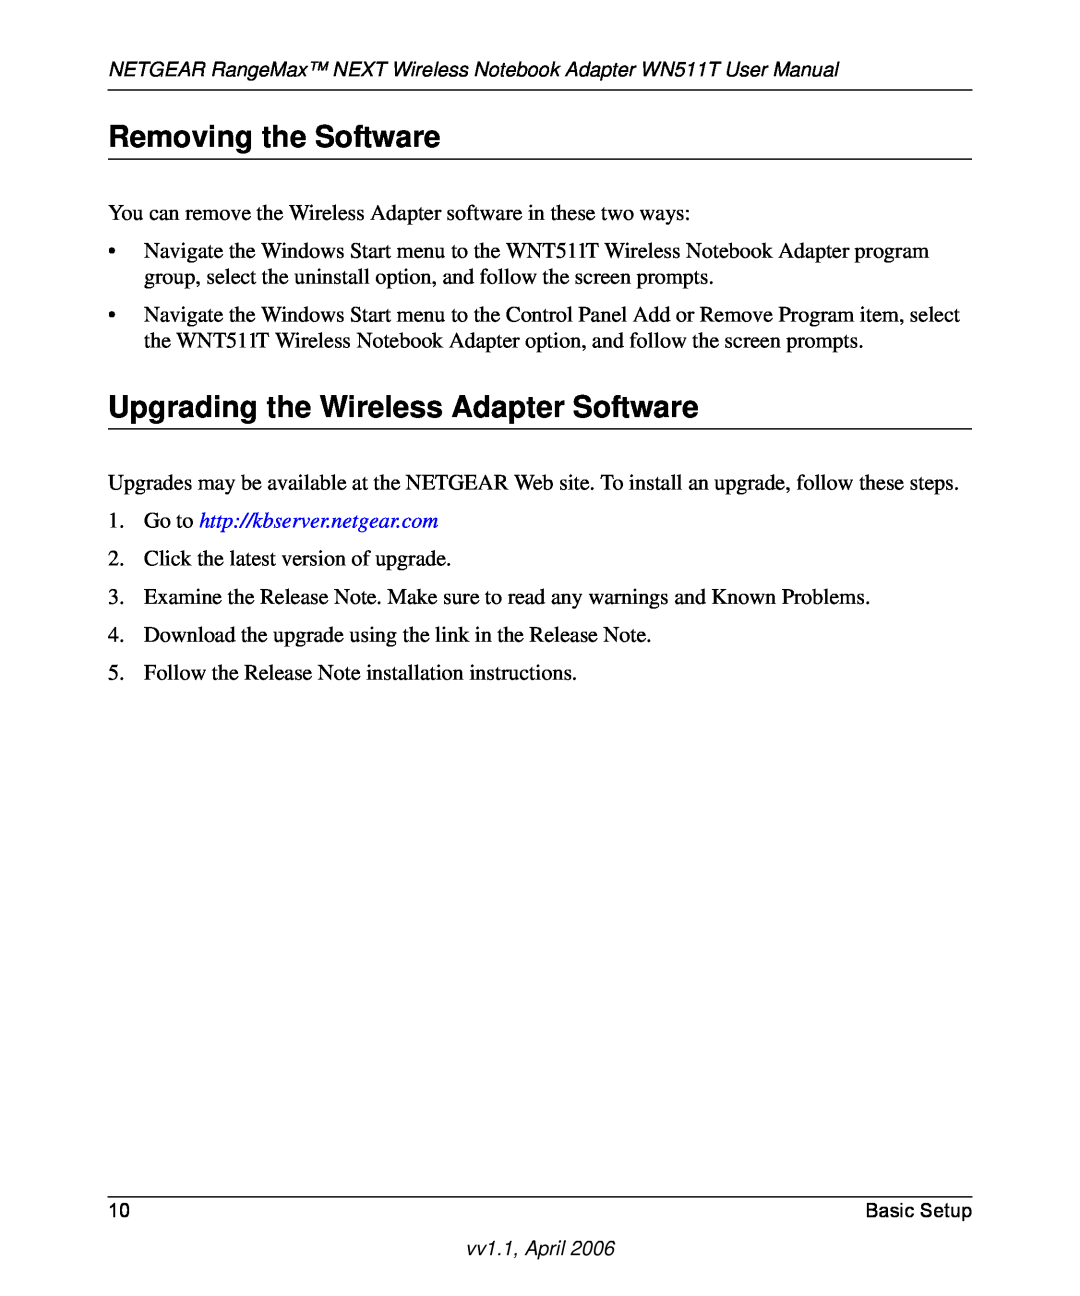 NETGEAR WN511T user manual Removing the Software, Upgrading the Wireless Adapter Software, Go to http//kbserver.netgear.com 